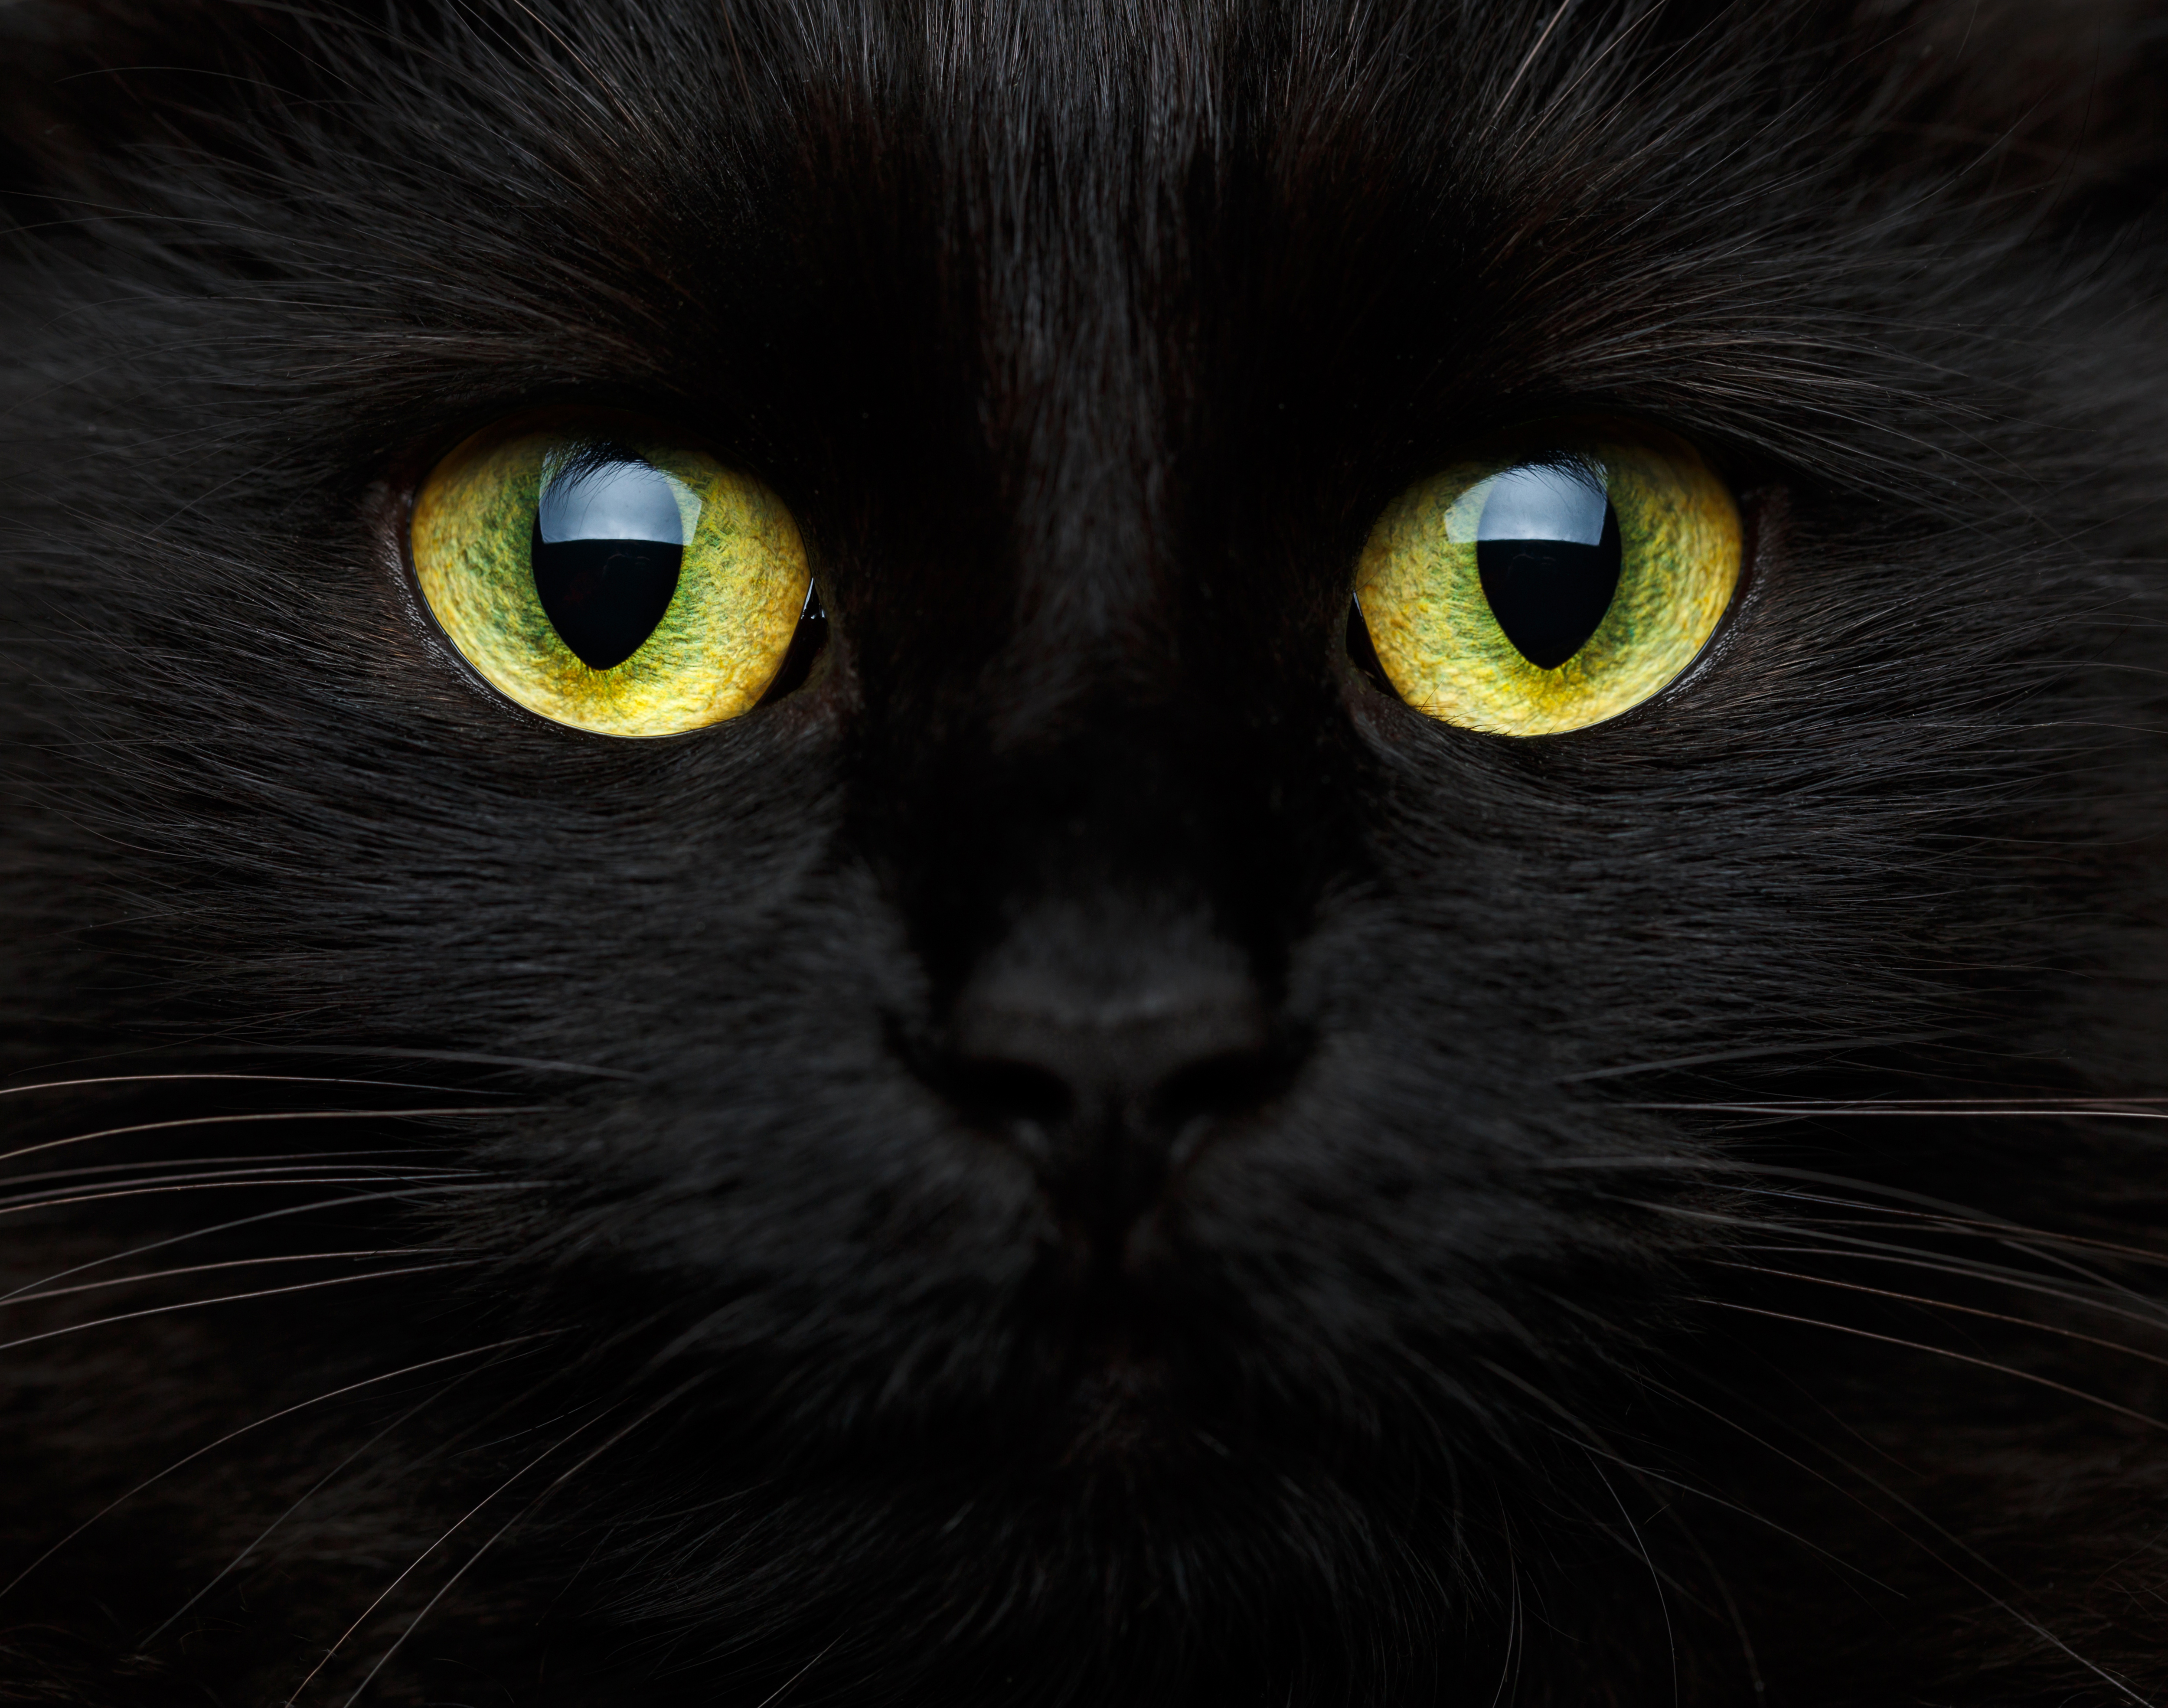 Black Cat Background Gallery Yopriceville High Quality Image